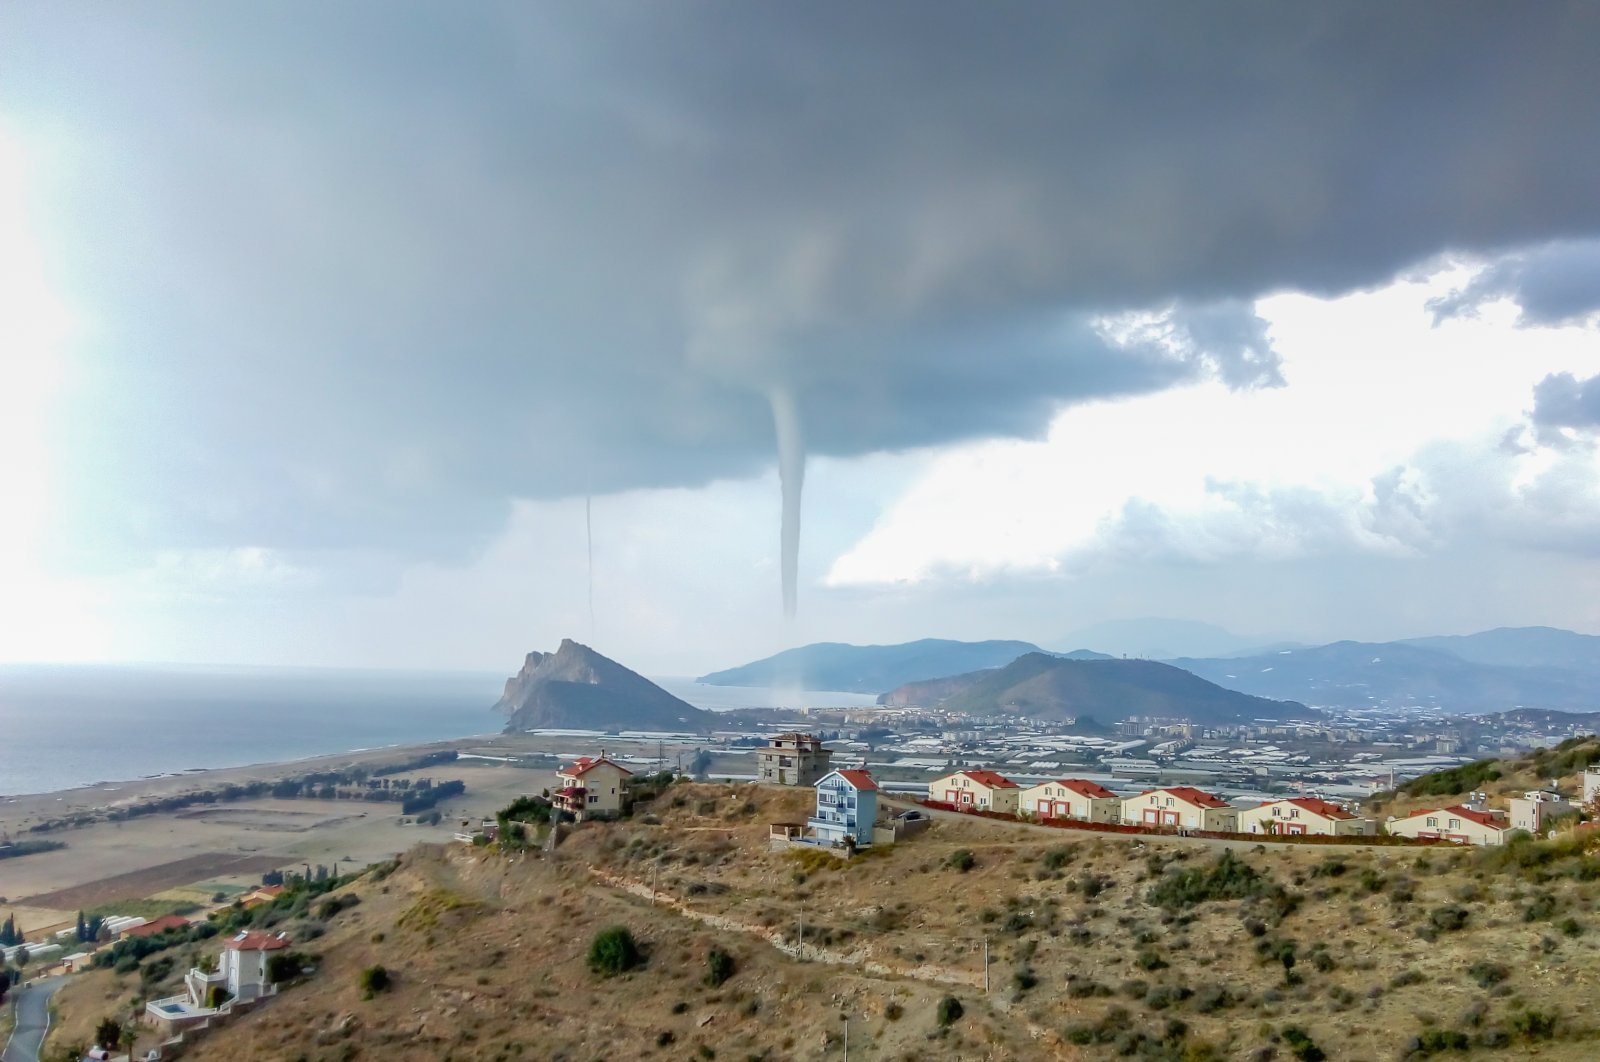 Two tornados tower above the sea off the coast of Gazipaşa district, in Antalya, southern Turkey, Nov. 11, 2018. (Shutterstock Photo) 